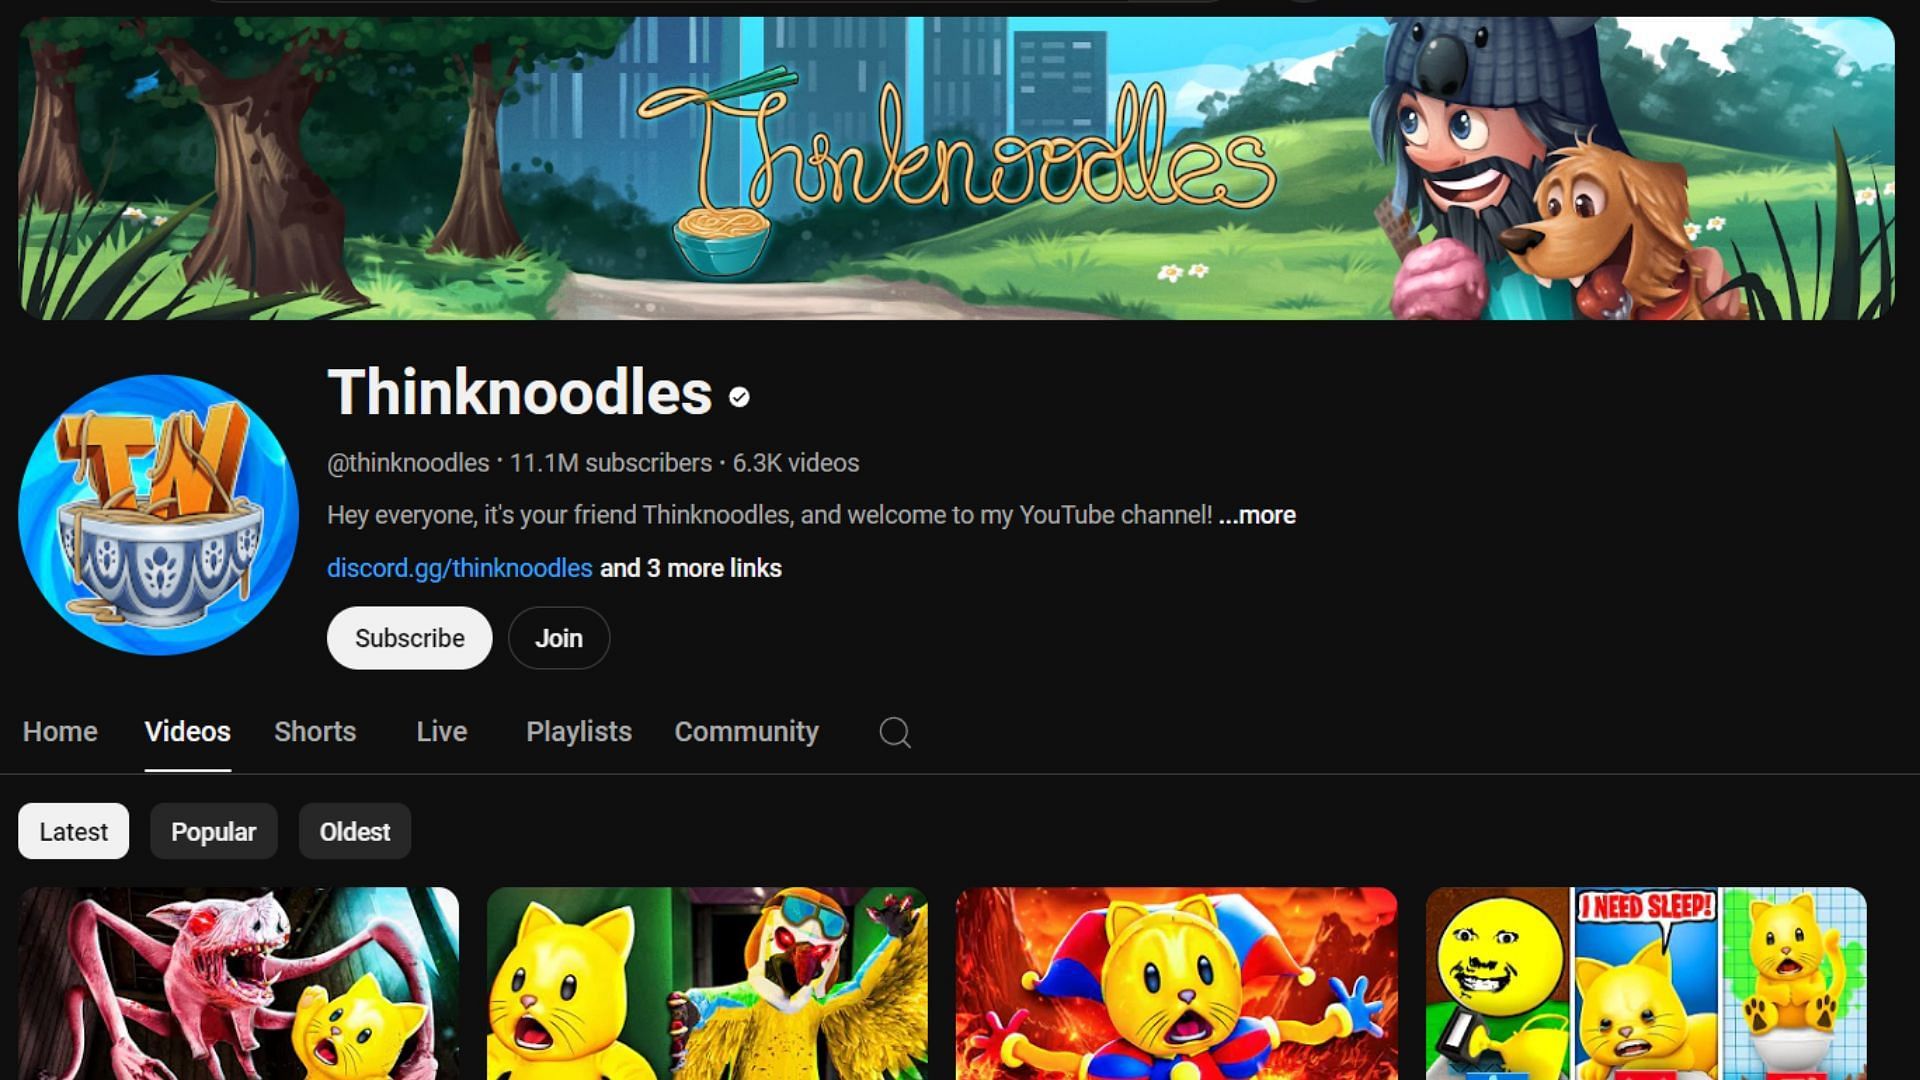 Thinknoodles has great content revolving around the platform (Image via YouTube/Thinknoodles)